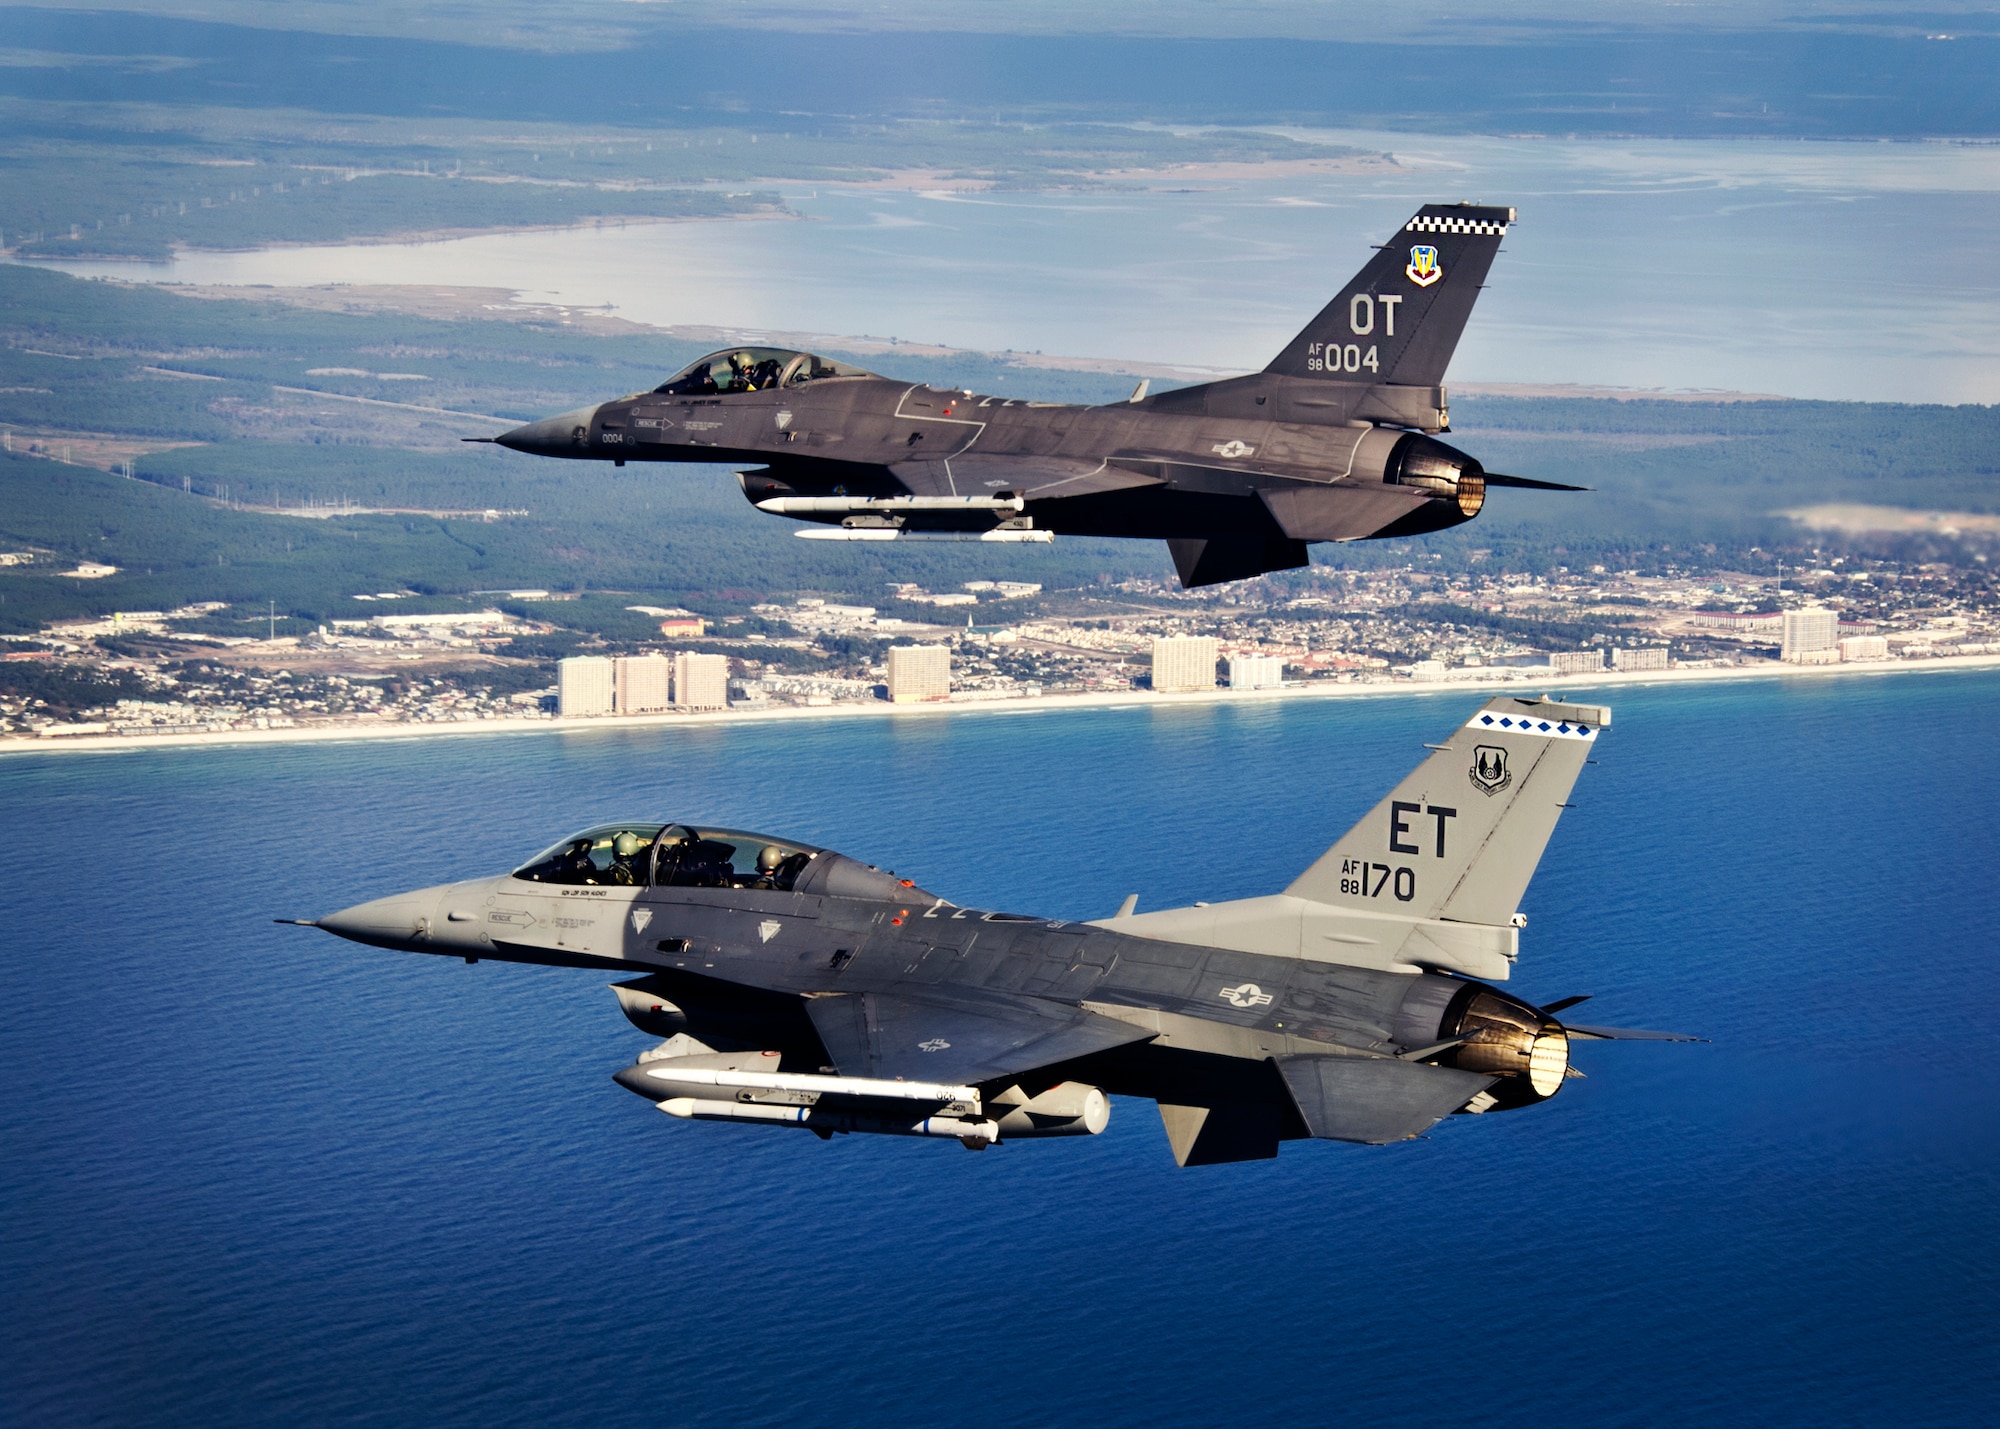 F-16 Fighting Falcons from the 40th Flight Test Squadron and 85th Test and Evaluation Squadron fly over the Emerald Coast Dec. 6 on a design-try-out mission for a new operational flight program software upgrade. The newest OFP for Block 40 and 50 model F-16s will be tested developmentally and operationally at Eglin Air Force Base, Fla., in 2014. This marks the first time ever an F-16 OFP has undergone developmental and operational testing in the same location. (Courtesy photo)
